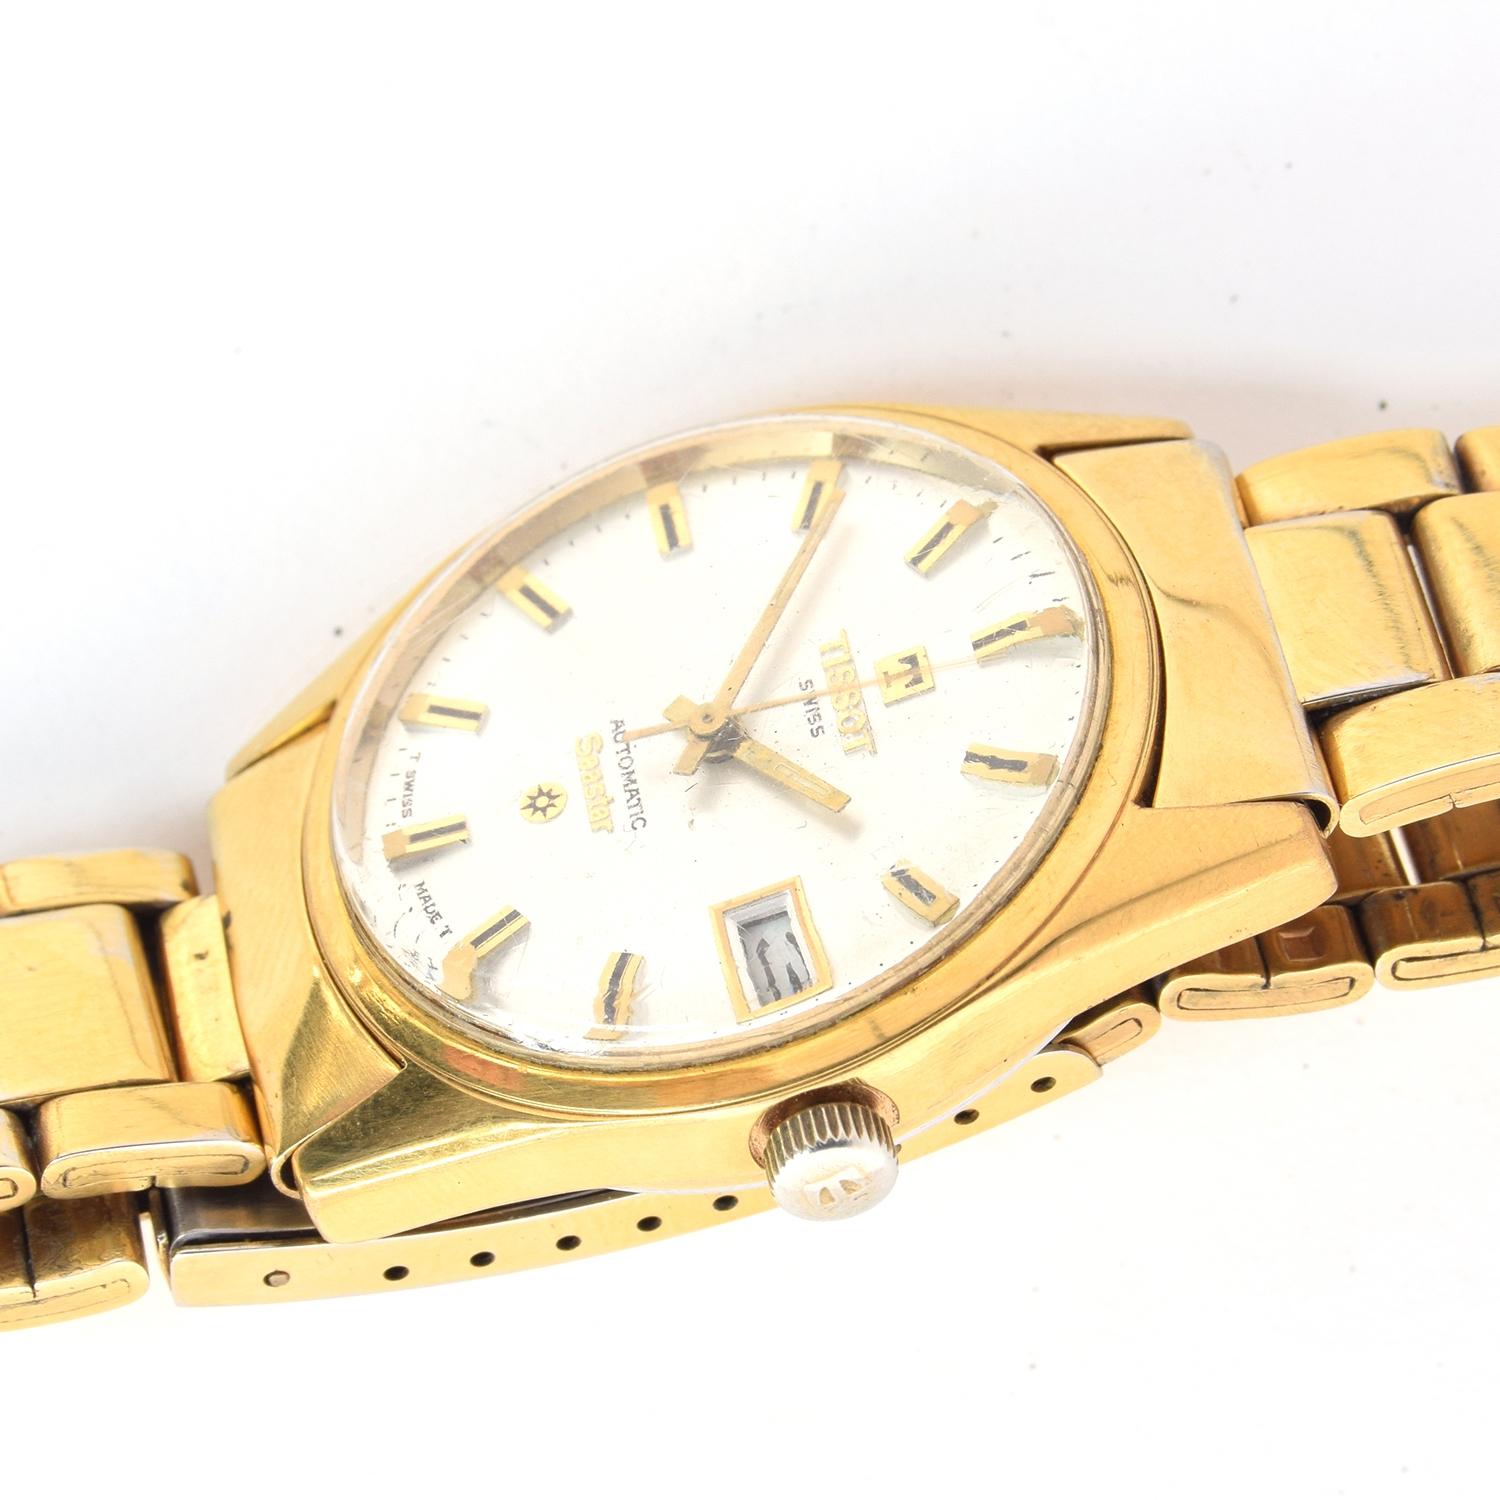 A TISSOT SEASTAR AUTOMATIC GENTLEMAN'S GOLD PLATED WRIST WATCH WITH DATE Circa 1960s, ref. 44543-1X, - Image 2 of 3